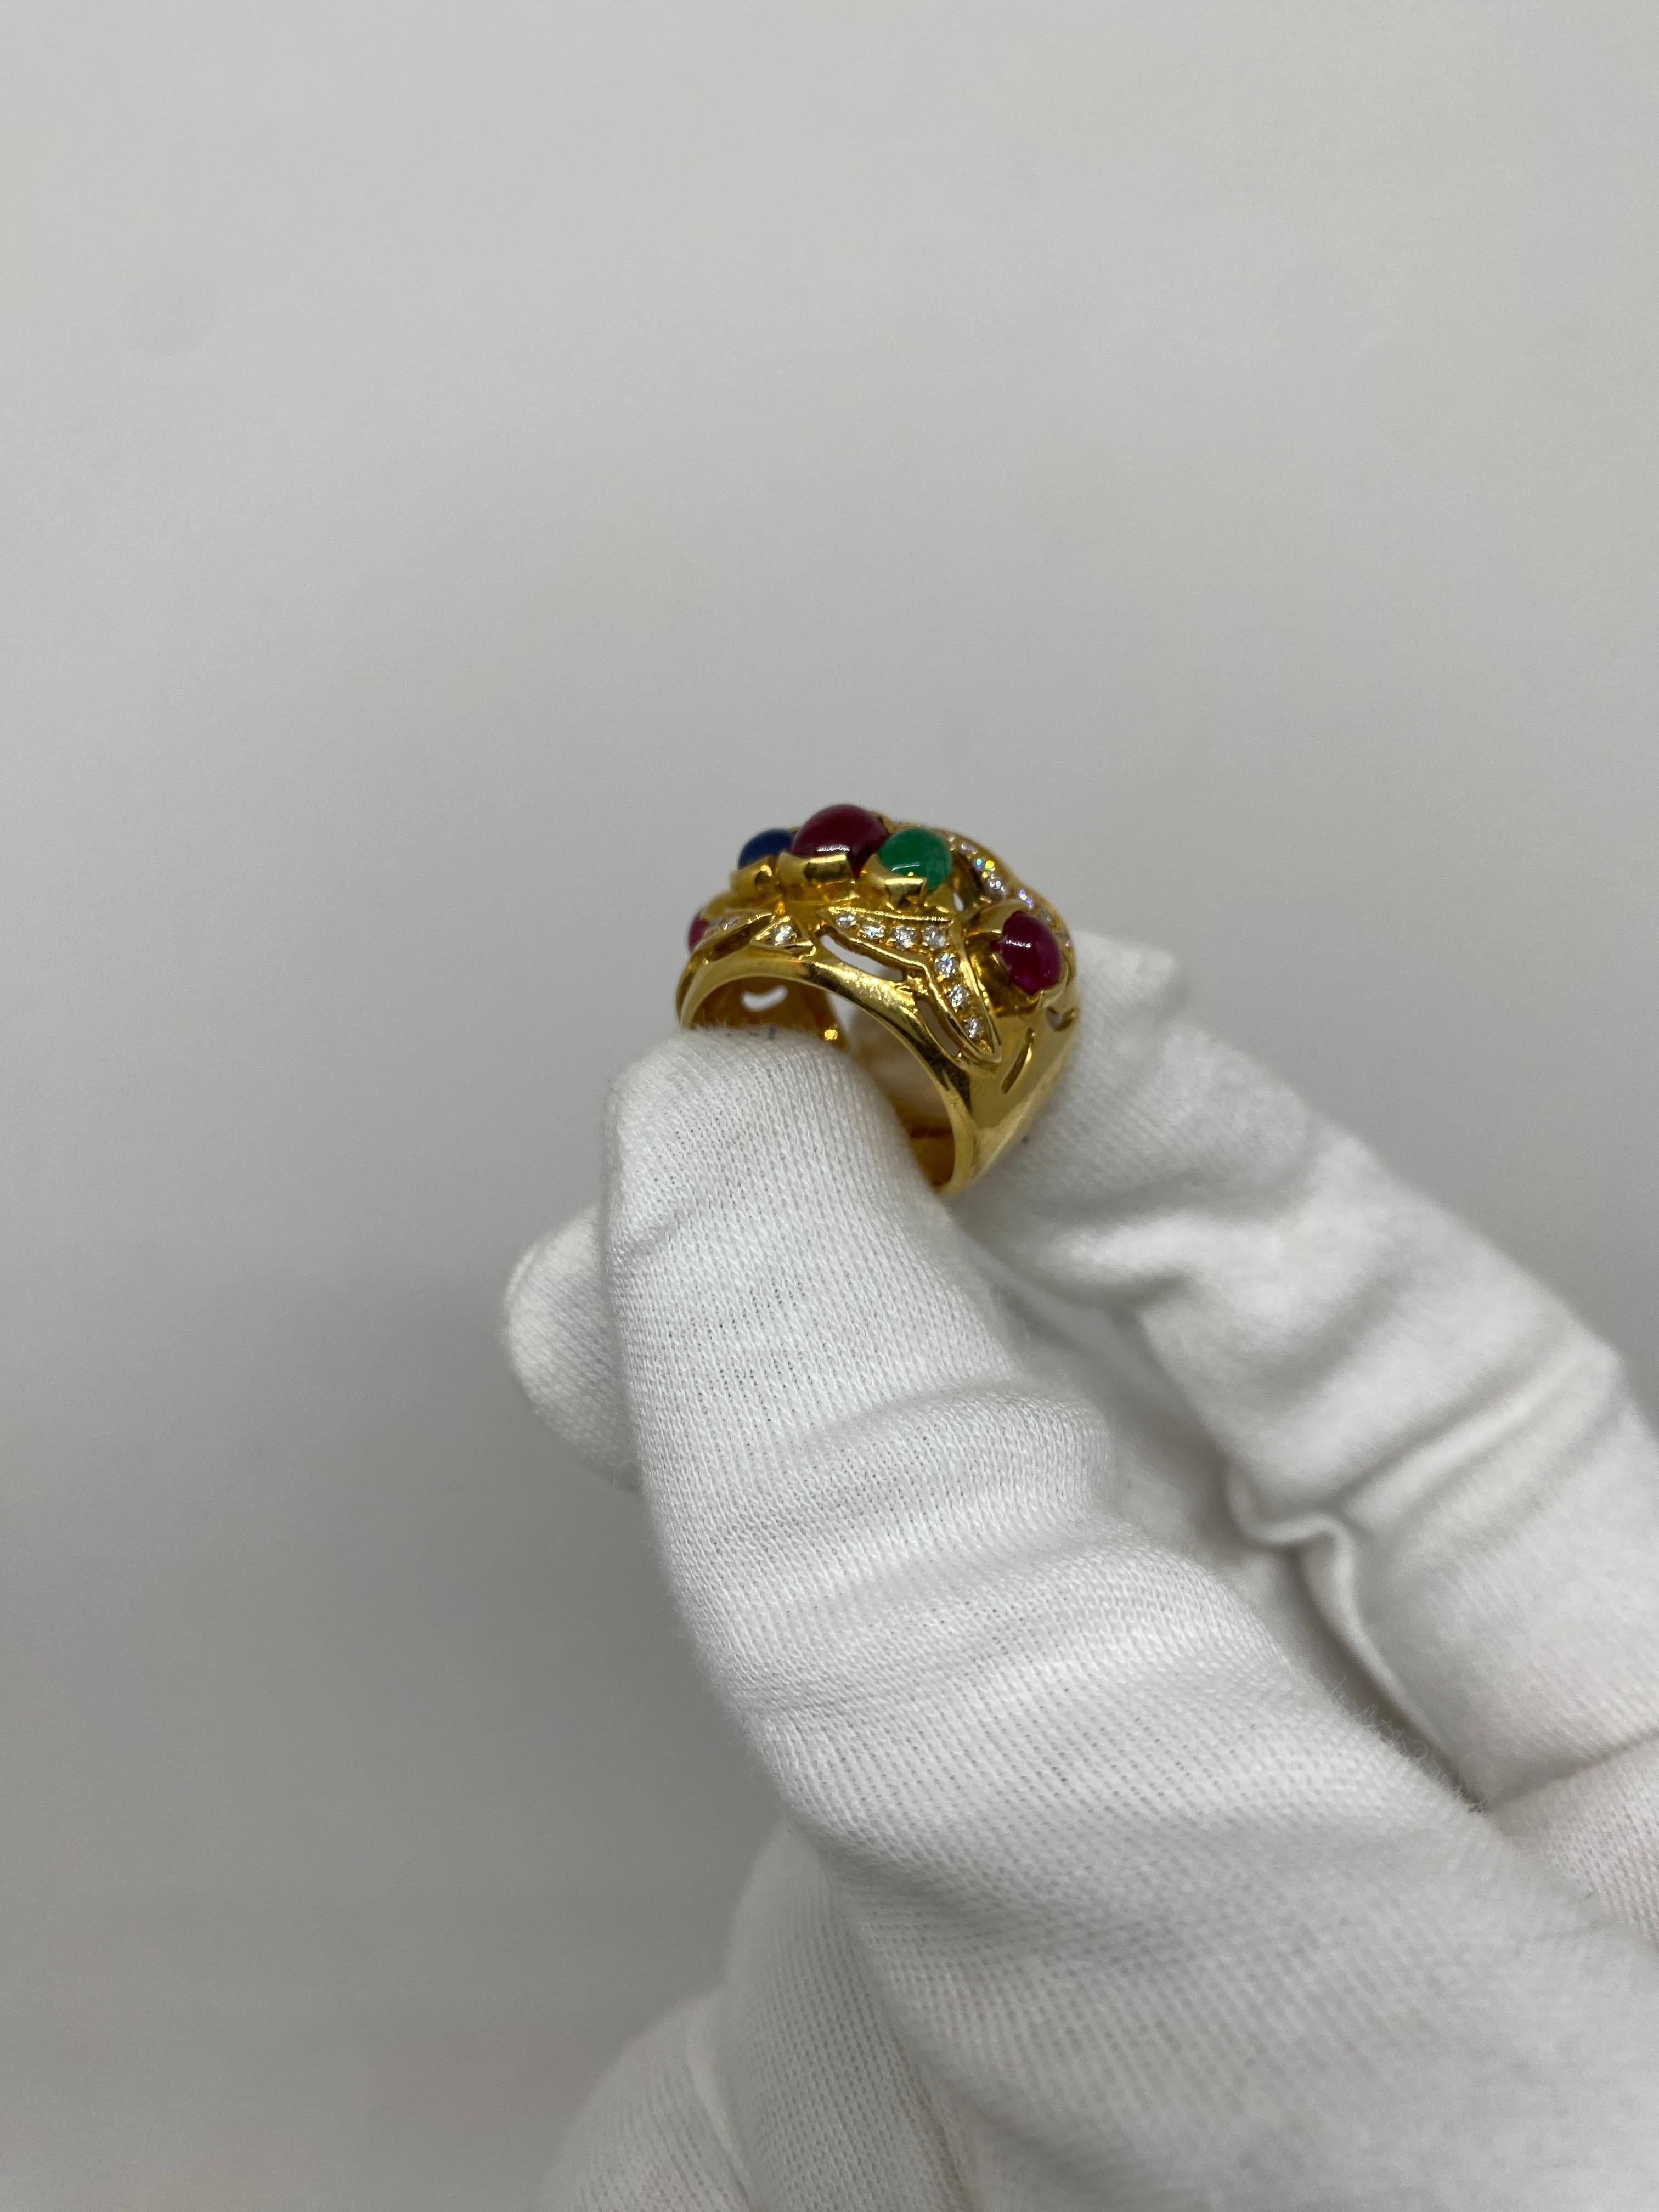 18Kt Yellow Gold Band Ring Natural Cabochon-Cut Sapphires, Emeralds, & Rubies For Sale 1